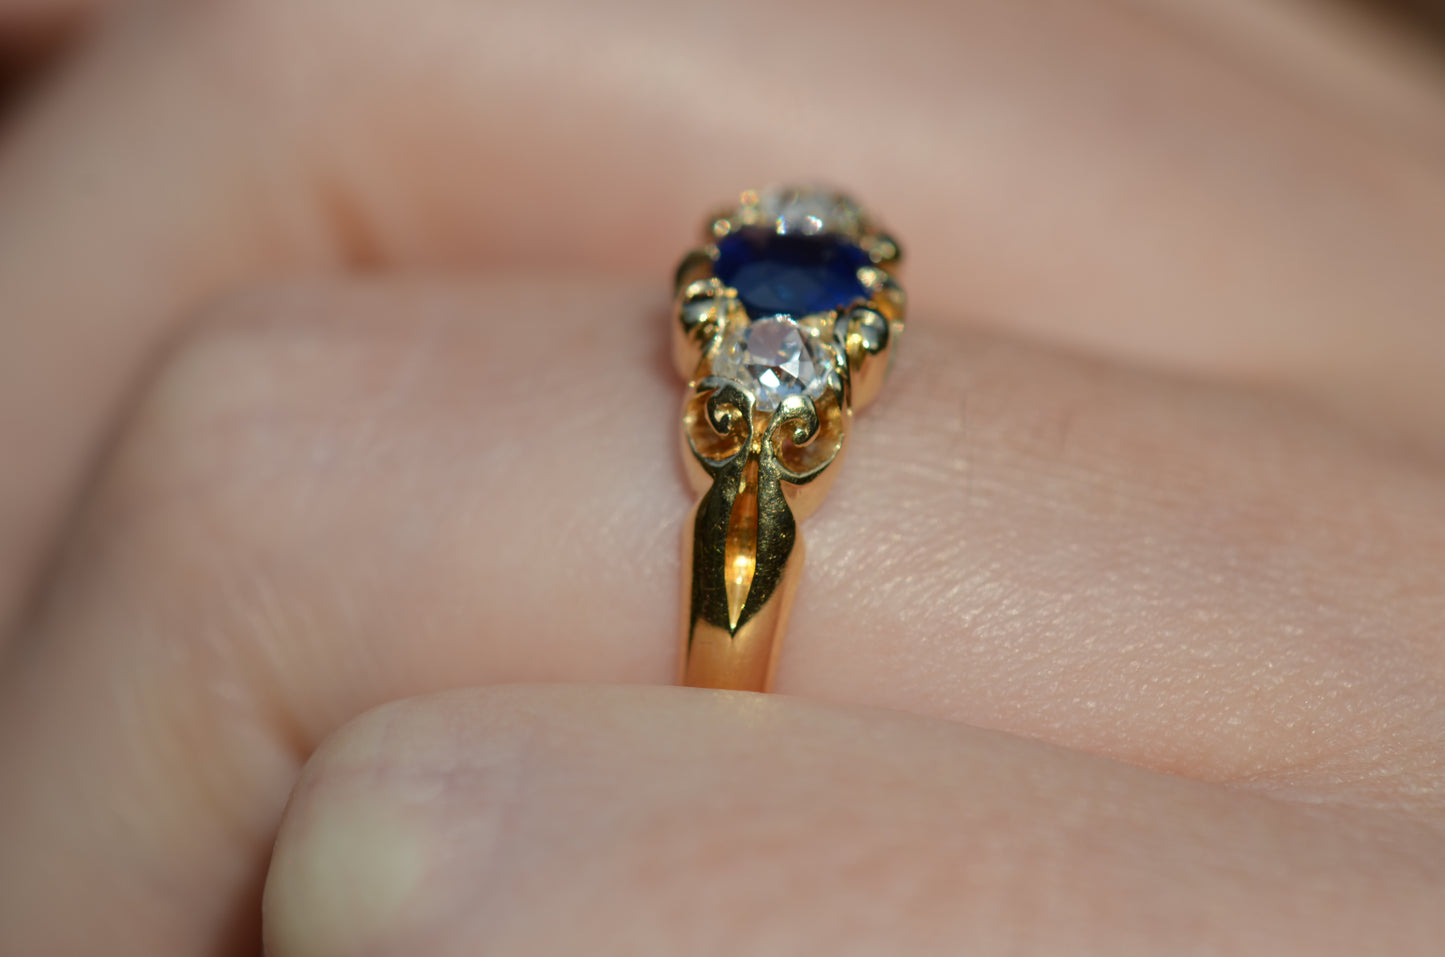 A closely cropped photo of the Victorian trilogy ring with an old mine cut diamond on either side of a vivid blue sapphire, all held in scrolling details of yellow gold. Shown on a Caucasian finger in a side view to highlight the ring's shoulder.